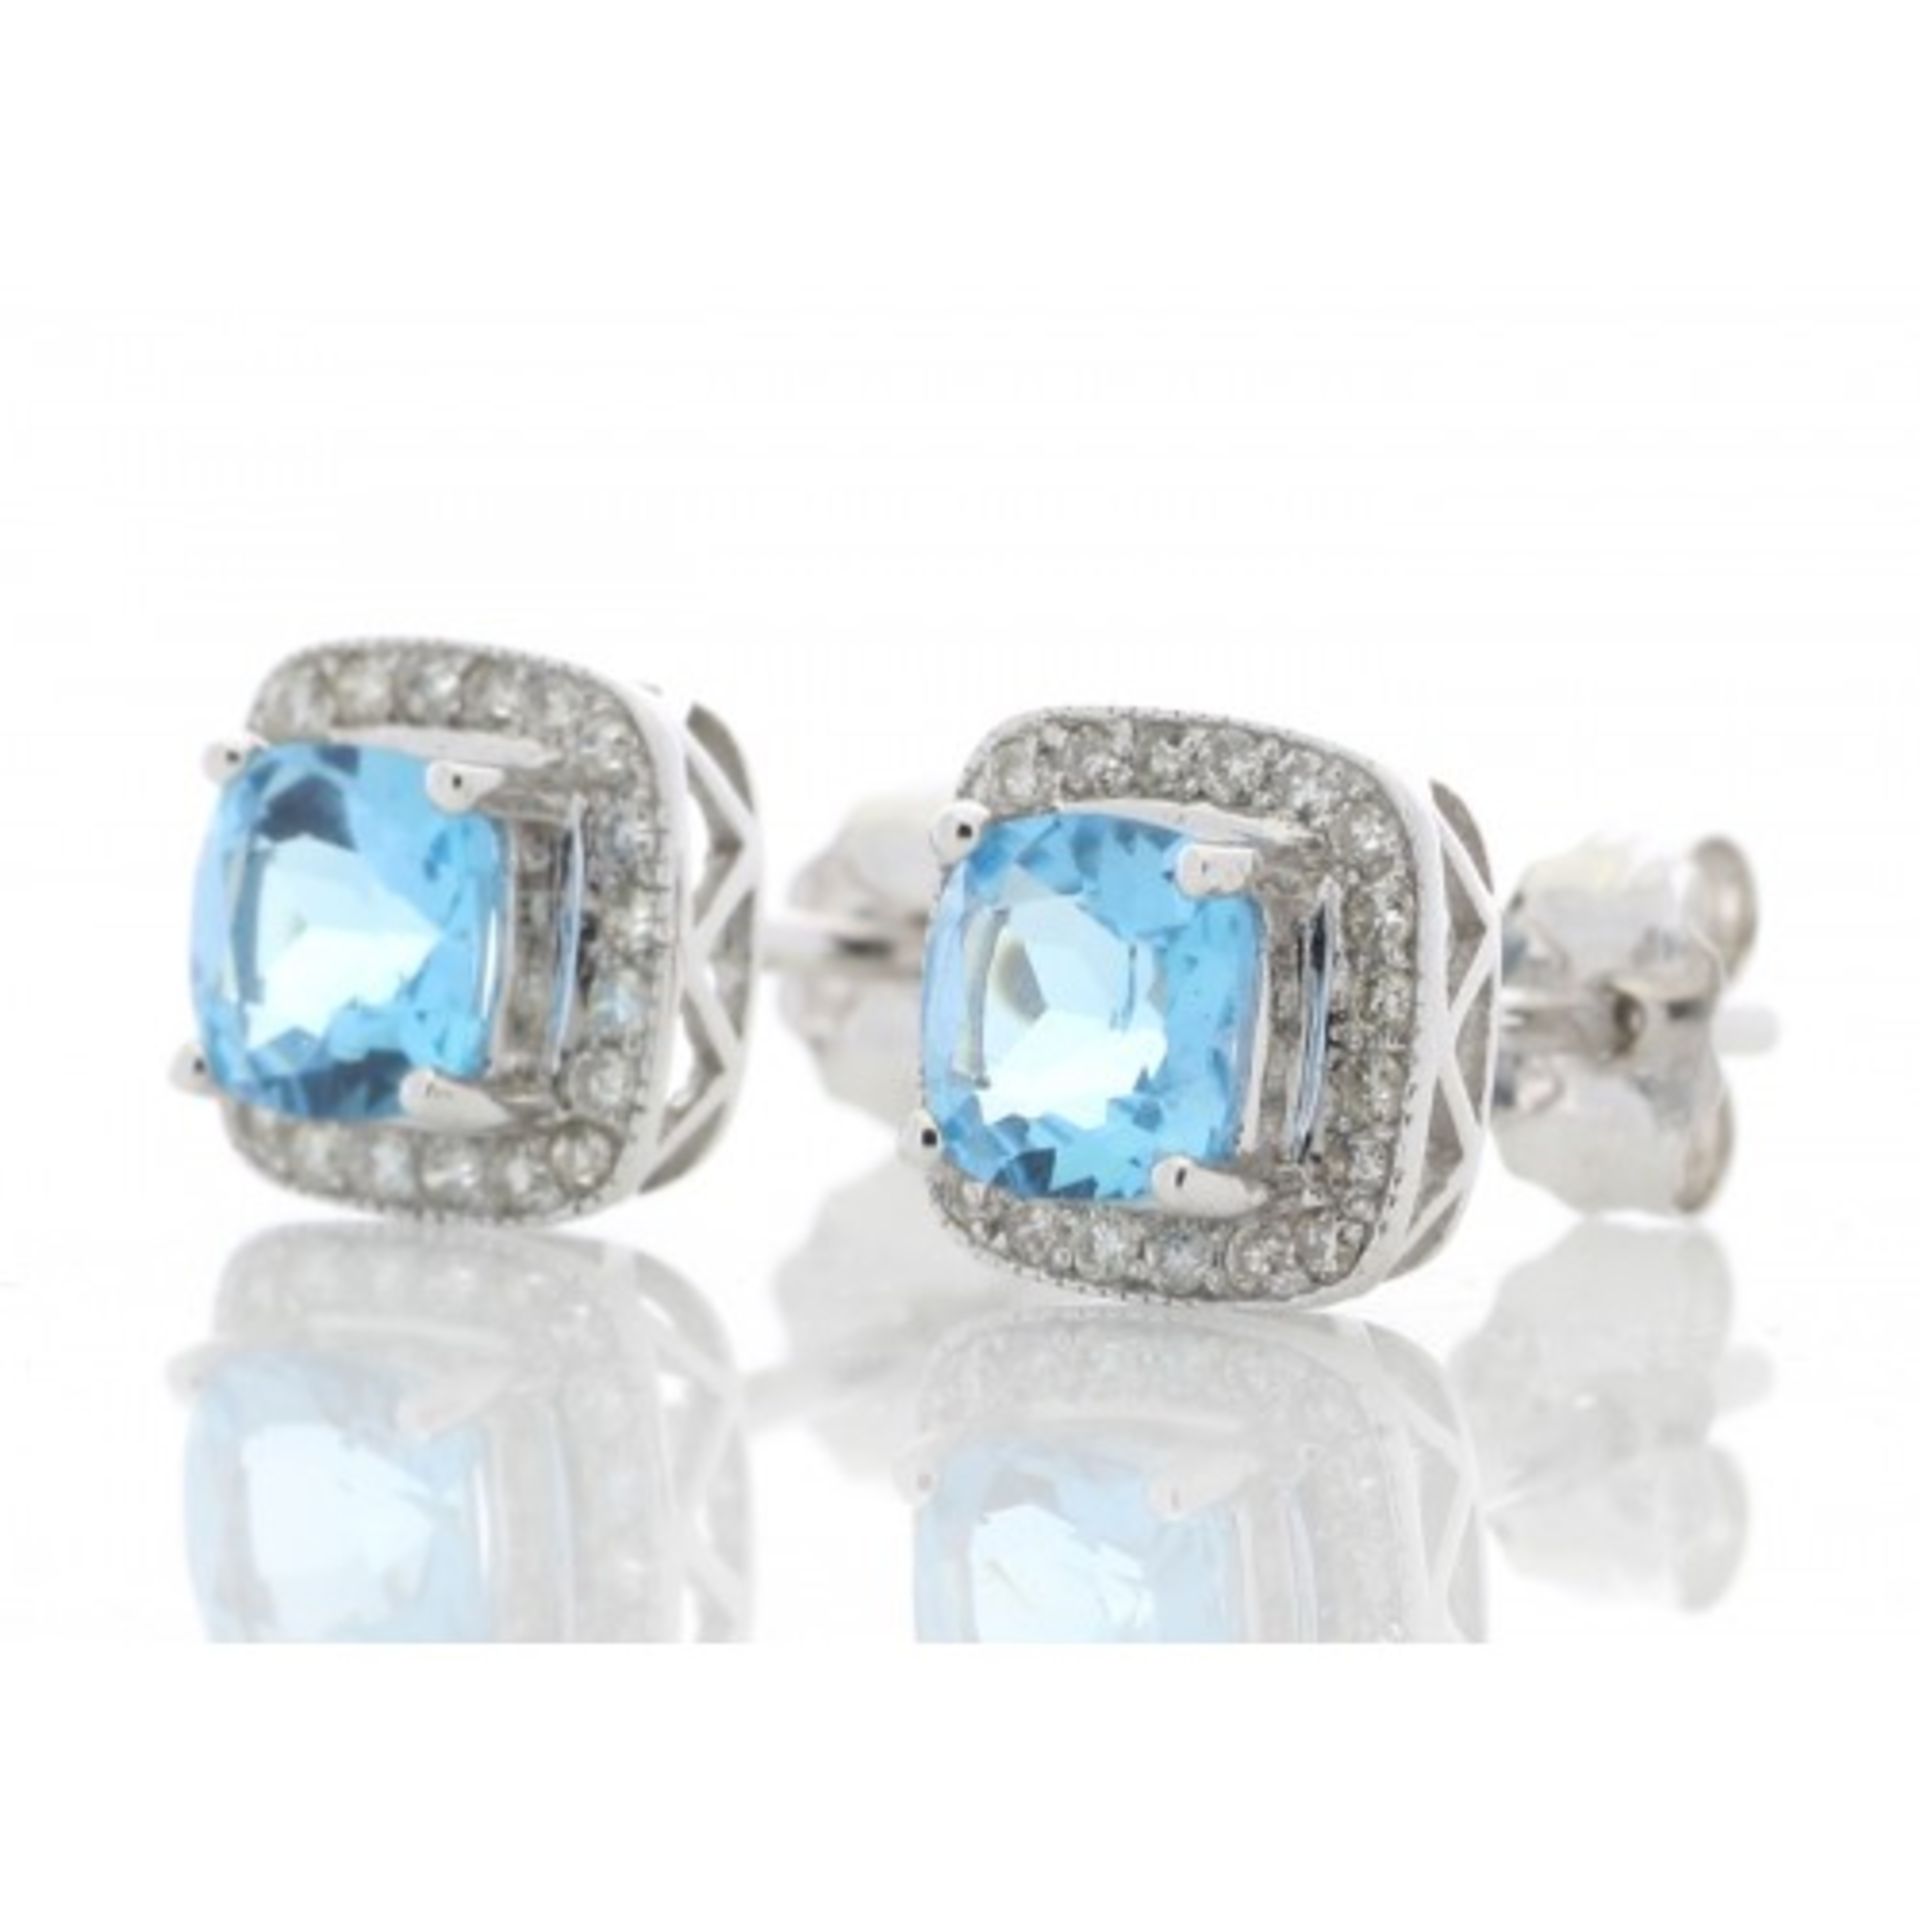 Blue topaz and diamond stud earrings. Cushion cut topaz surrounded by small brilliant cut - Image 2 of 4